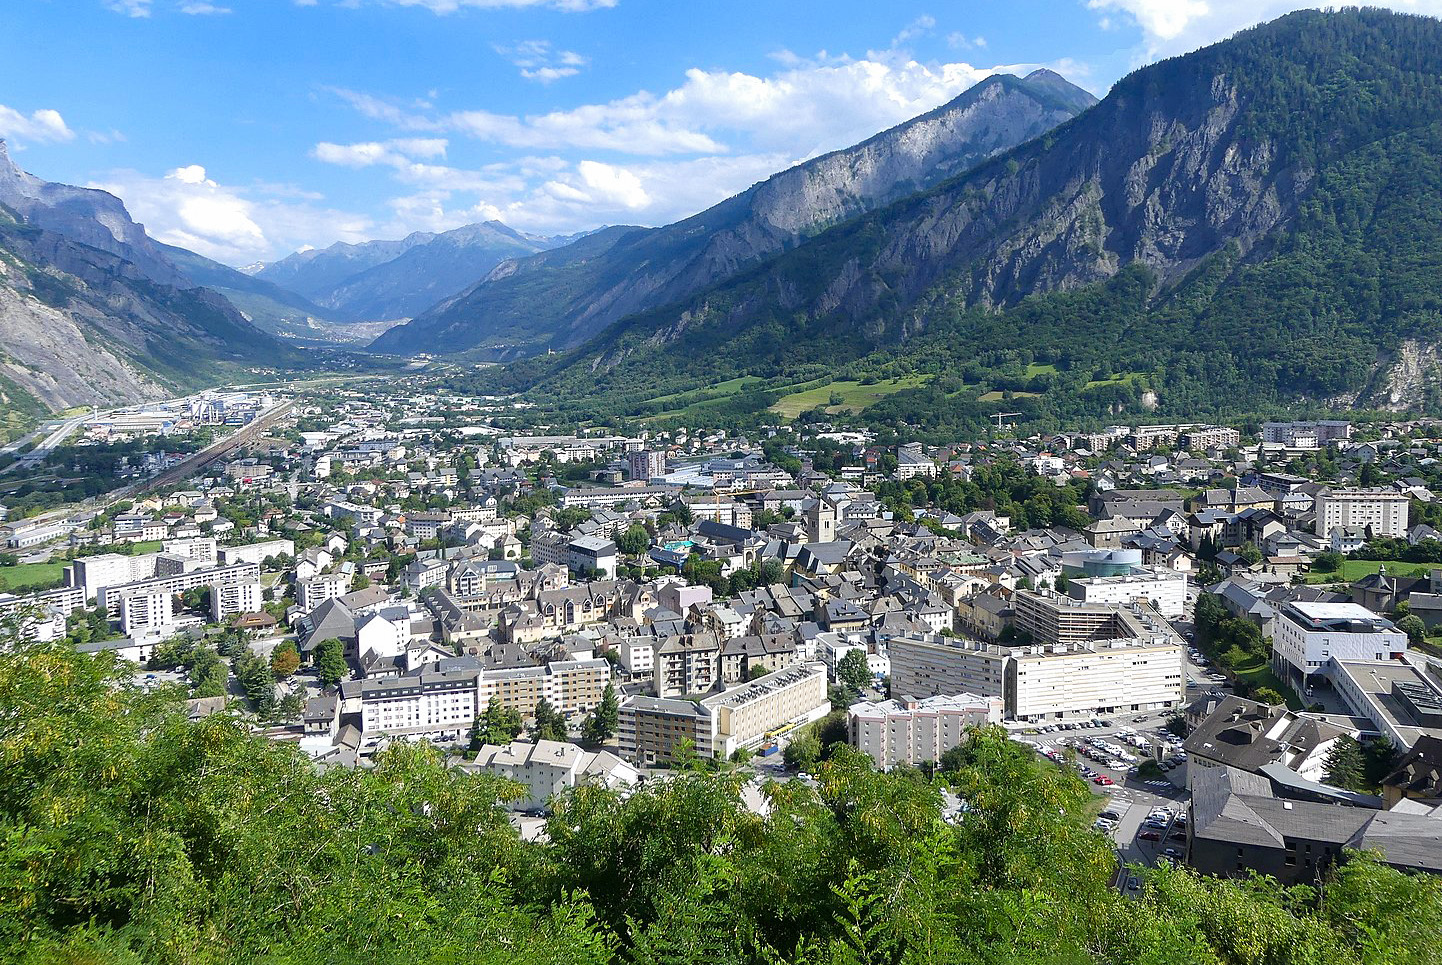 General view of Saint-Jean-de-Maurienne © Florian Pépellin - license [CC BY-SA 4.0] from Wikimedia Commons